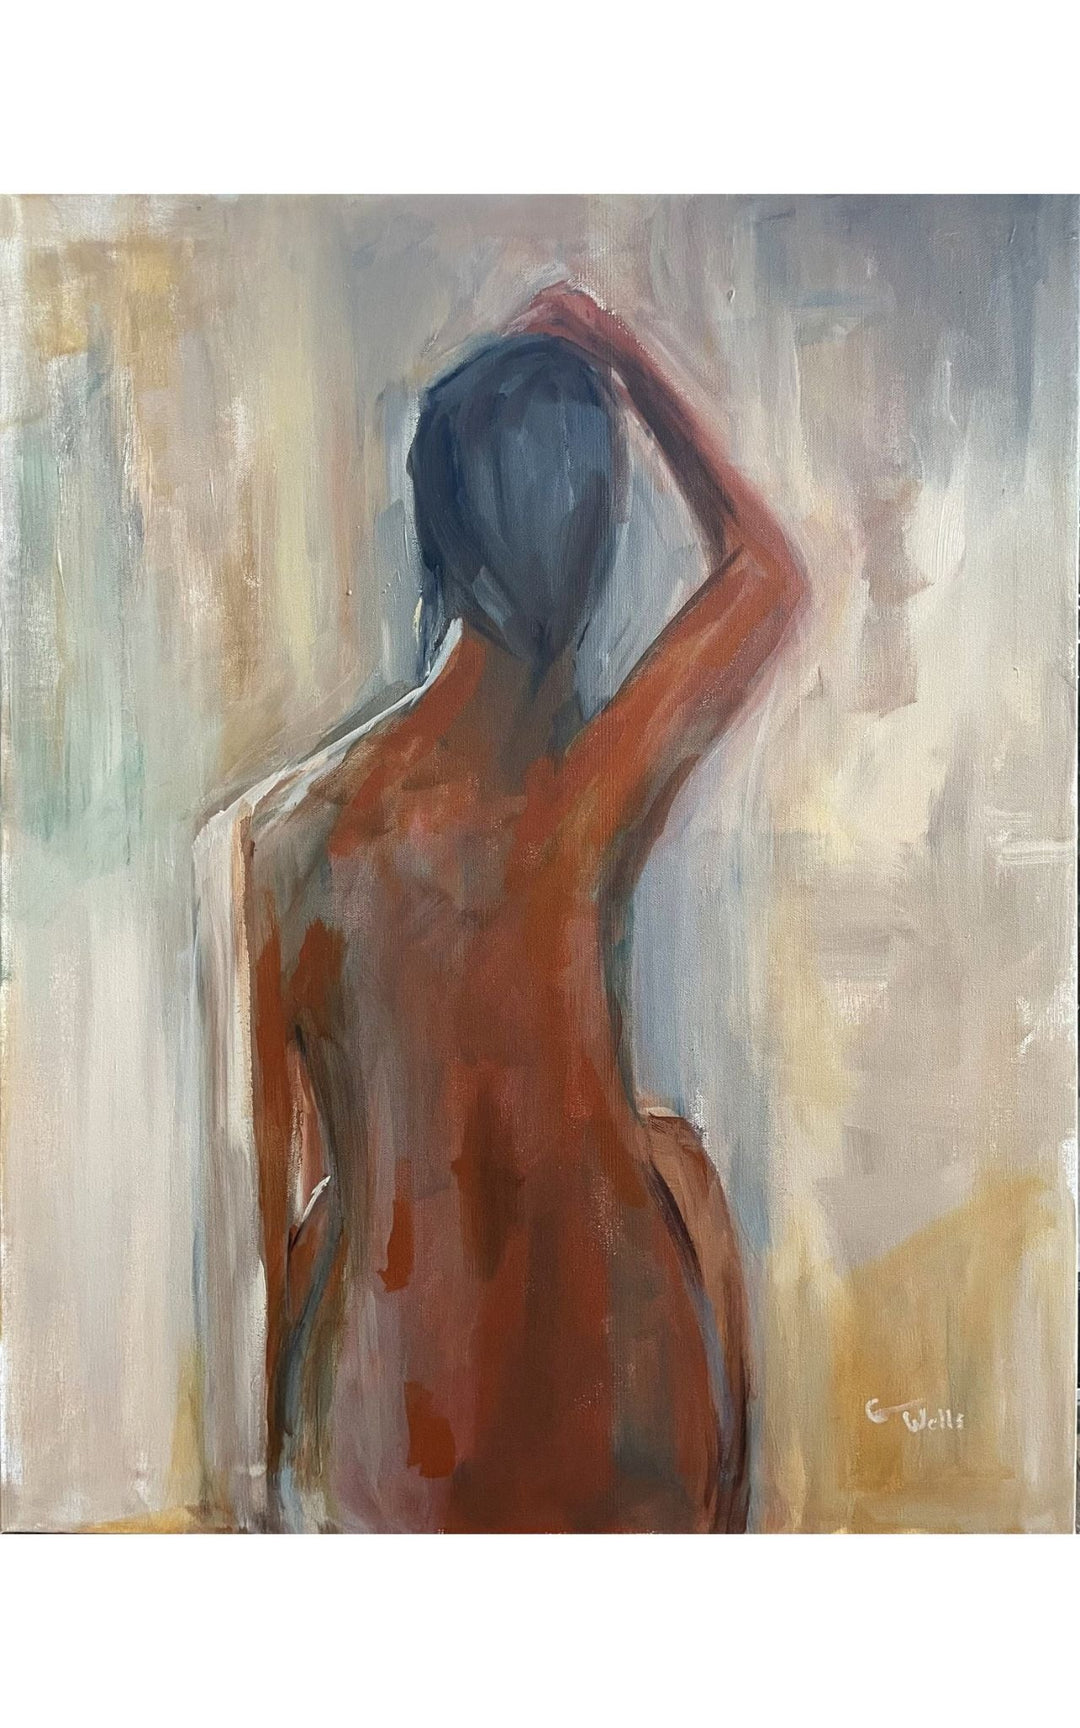 Acrylic painting of darker female figure from behind with hand on head against a light background Solace - Artly International